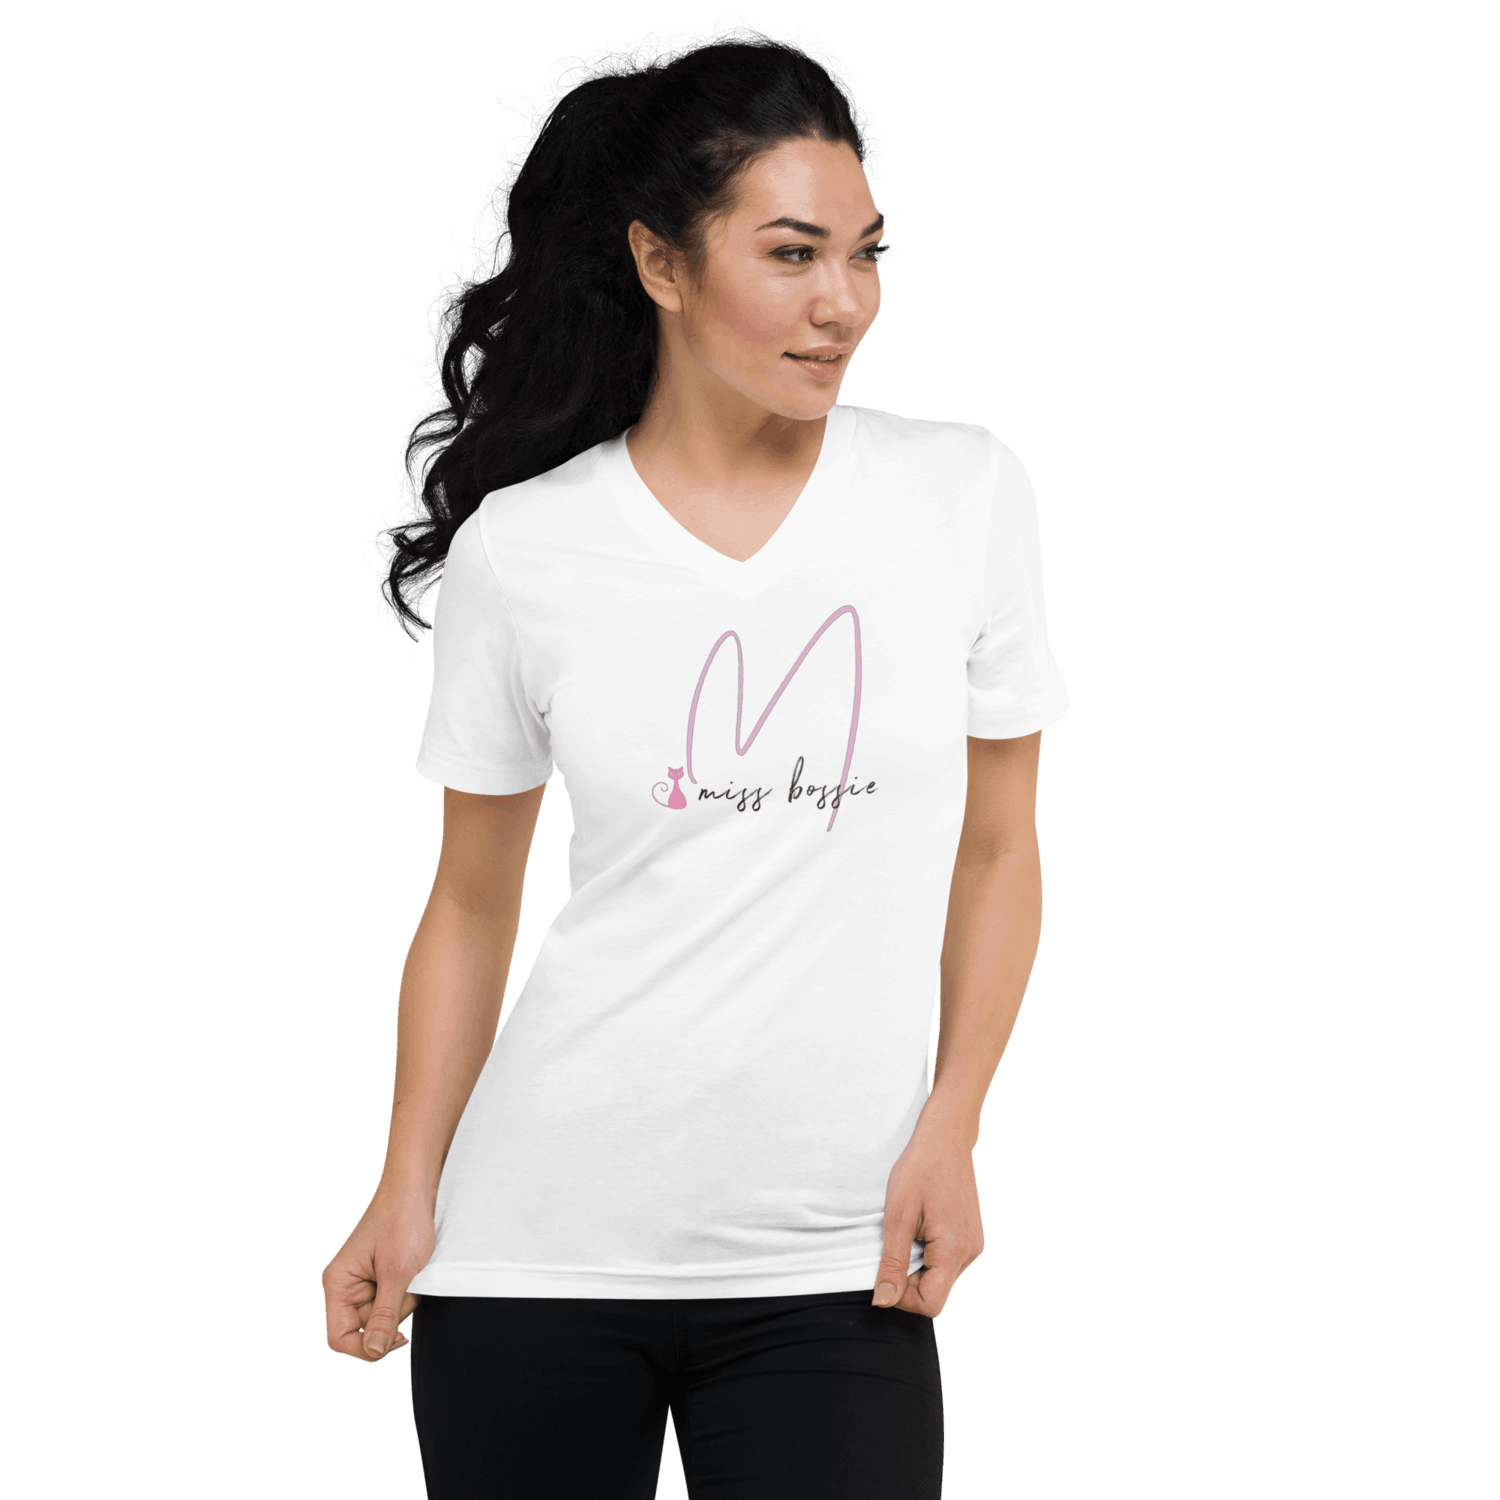 The Miss Bossie Tee - Limited Edition